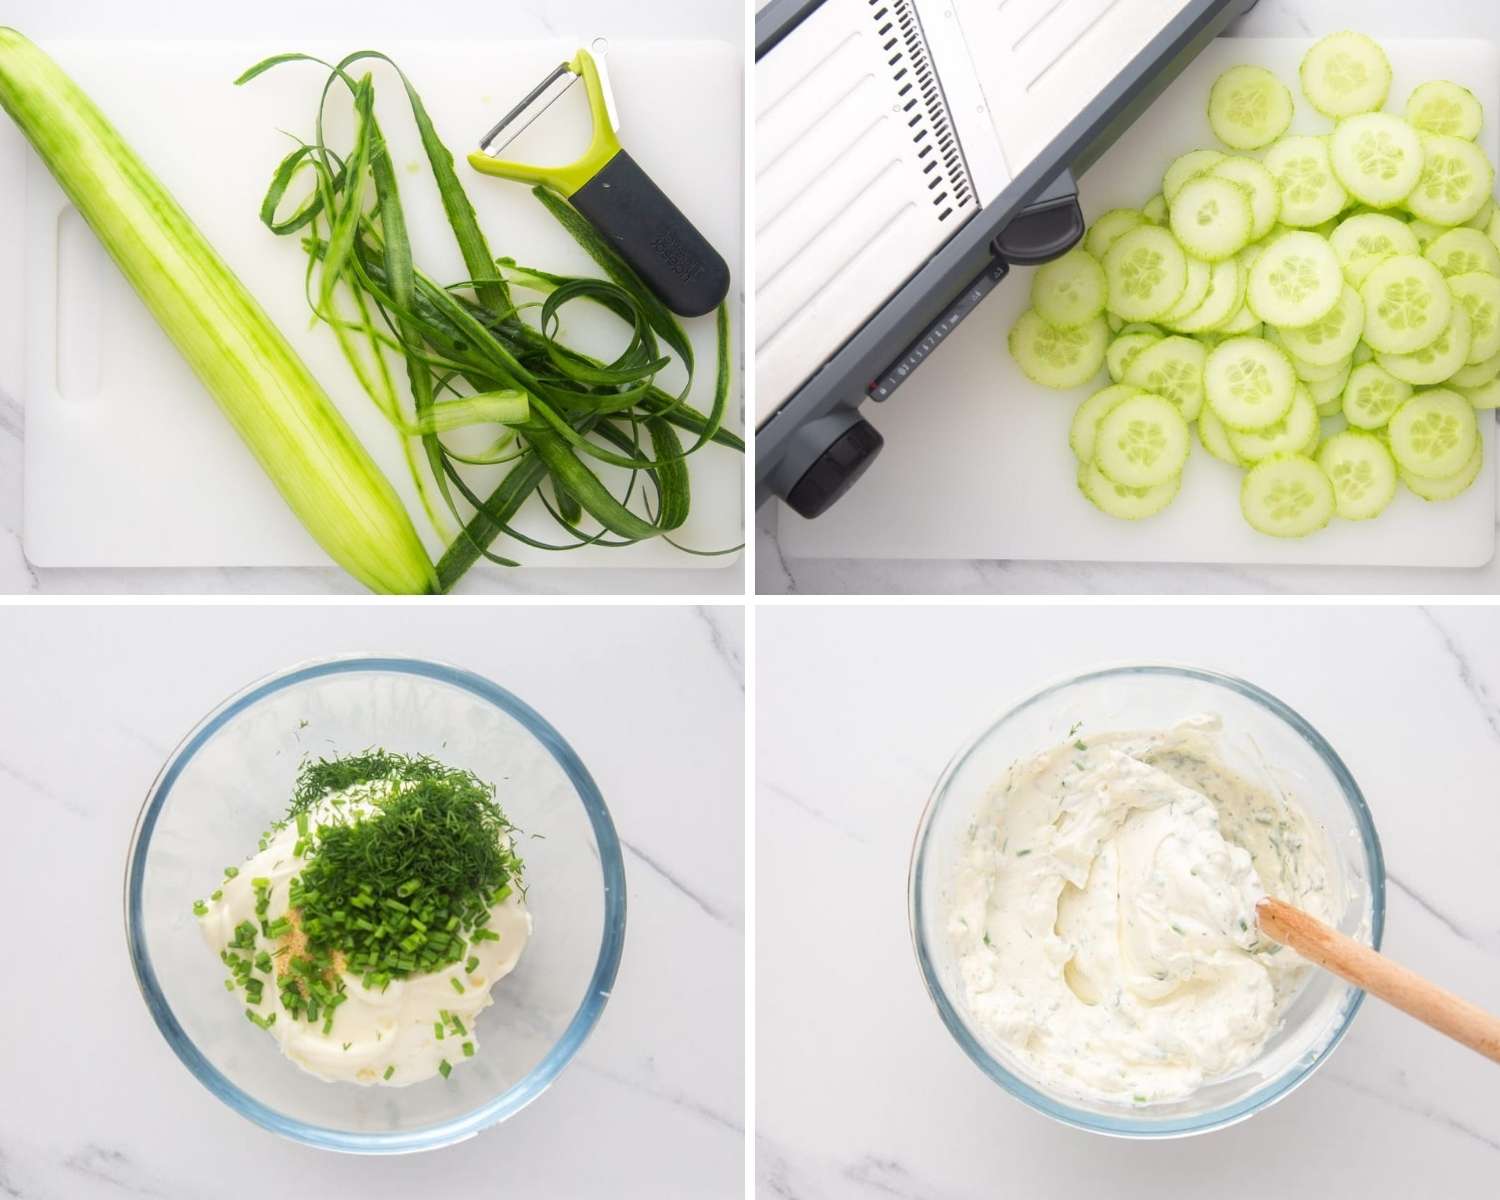 four images showing how to prep the cucumbers and spread for tea sandwiches